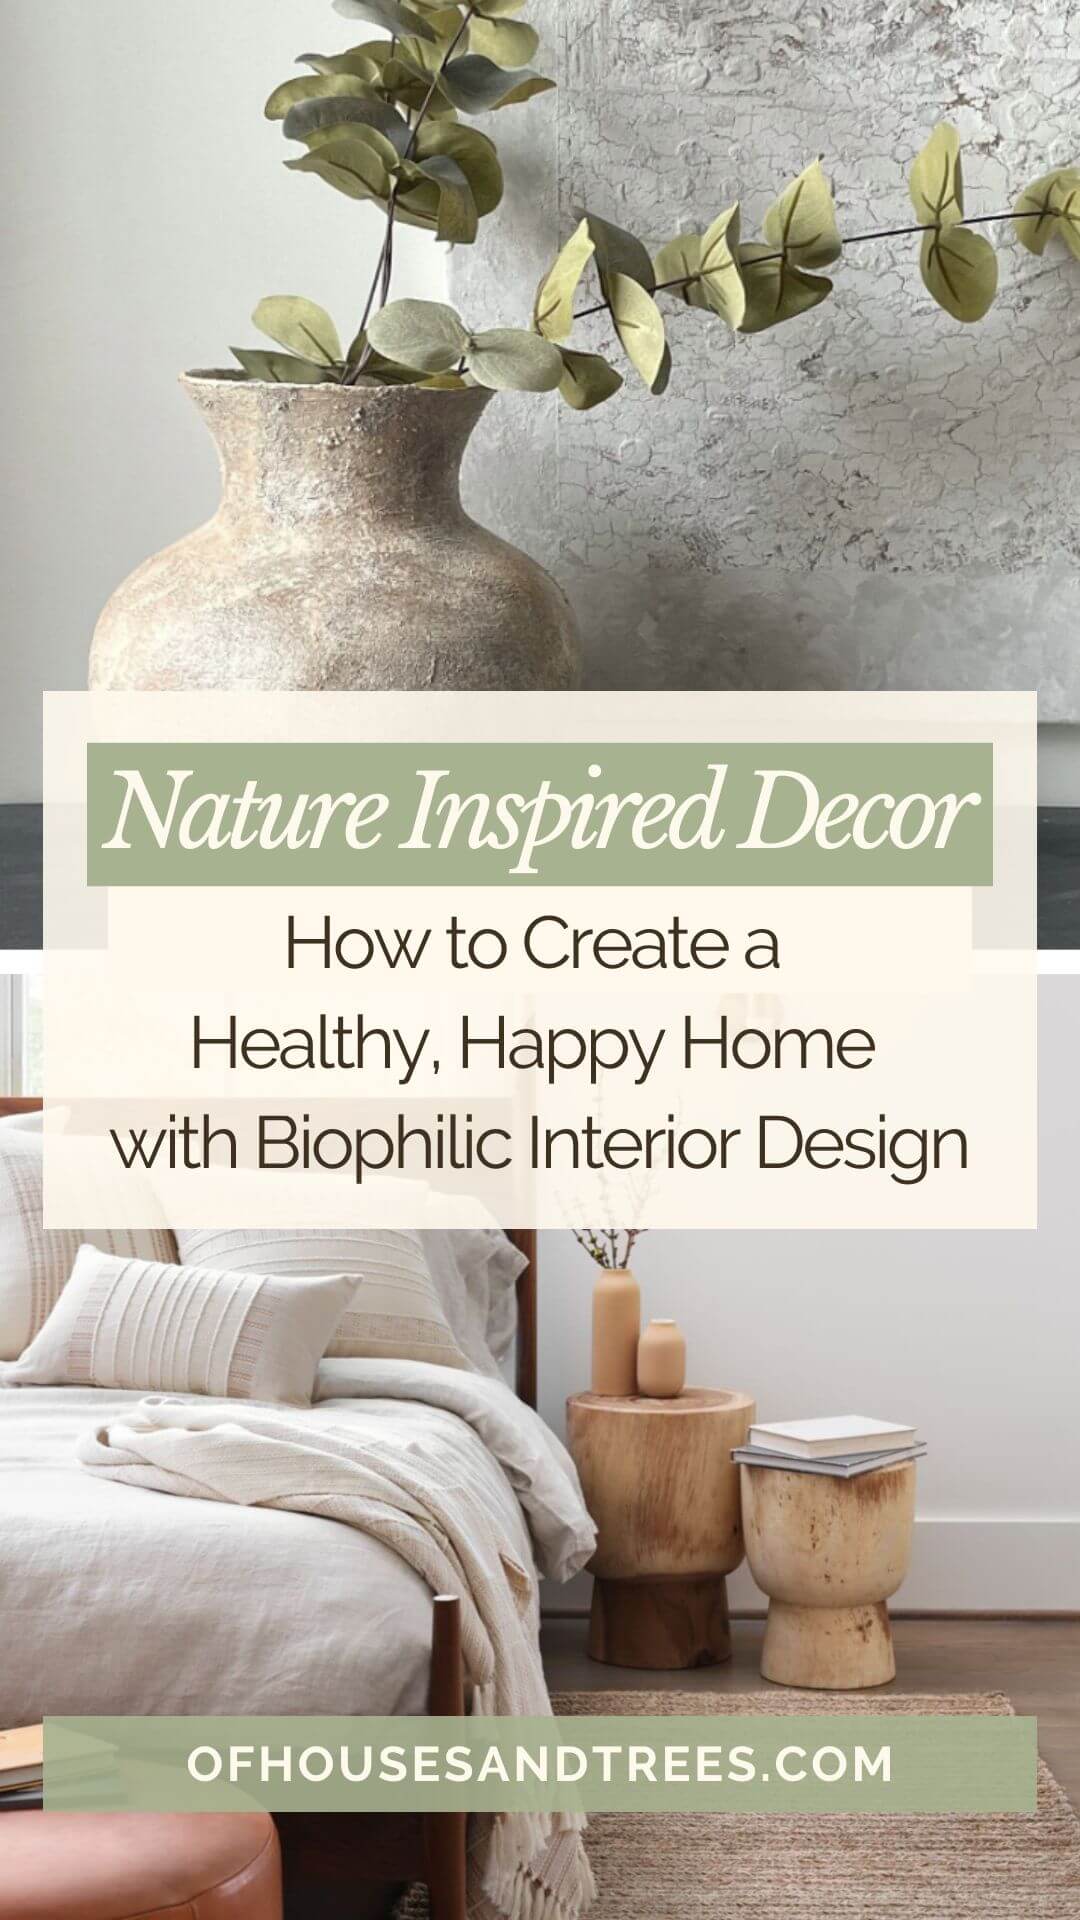 Biophilic Home Design: What It Is, It's Benefits + Why You Should ...